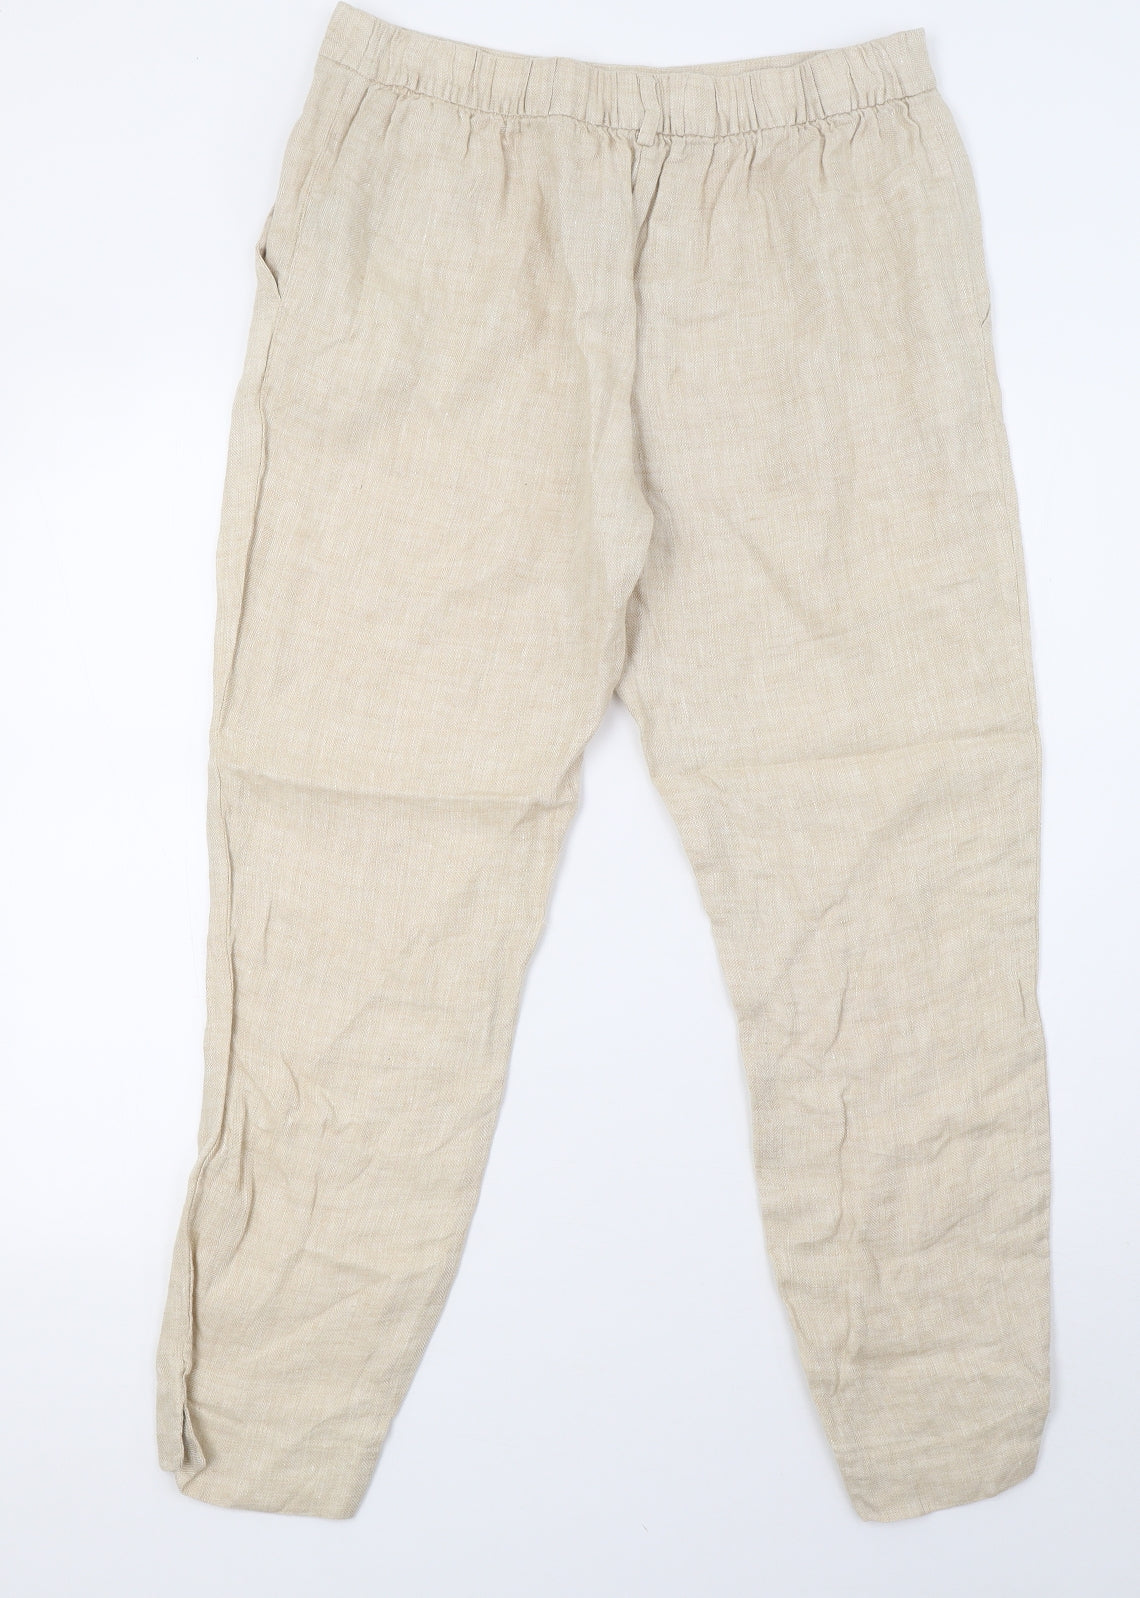 Men's Trousers & Chinos | Men's Casual Trousers | Tu clothing